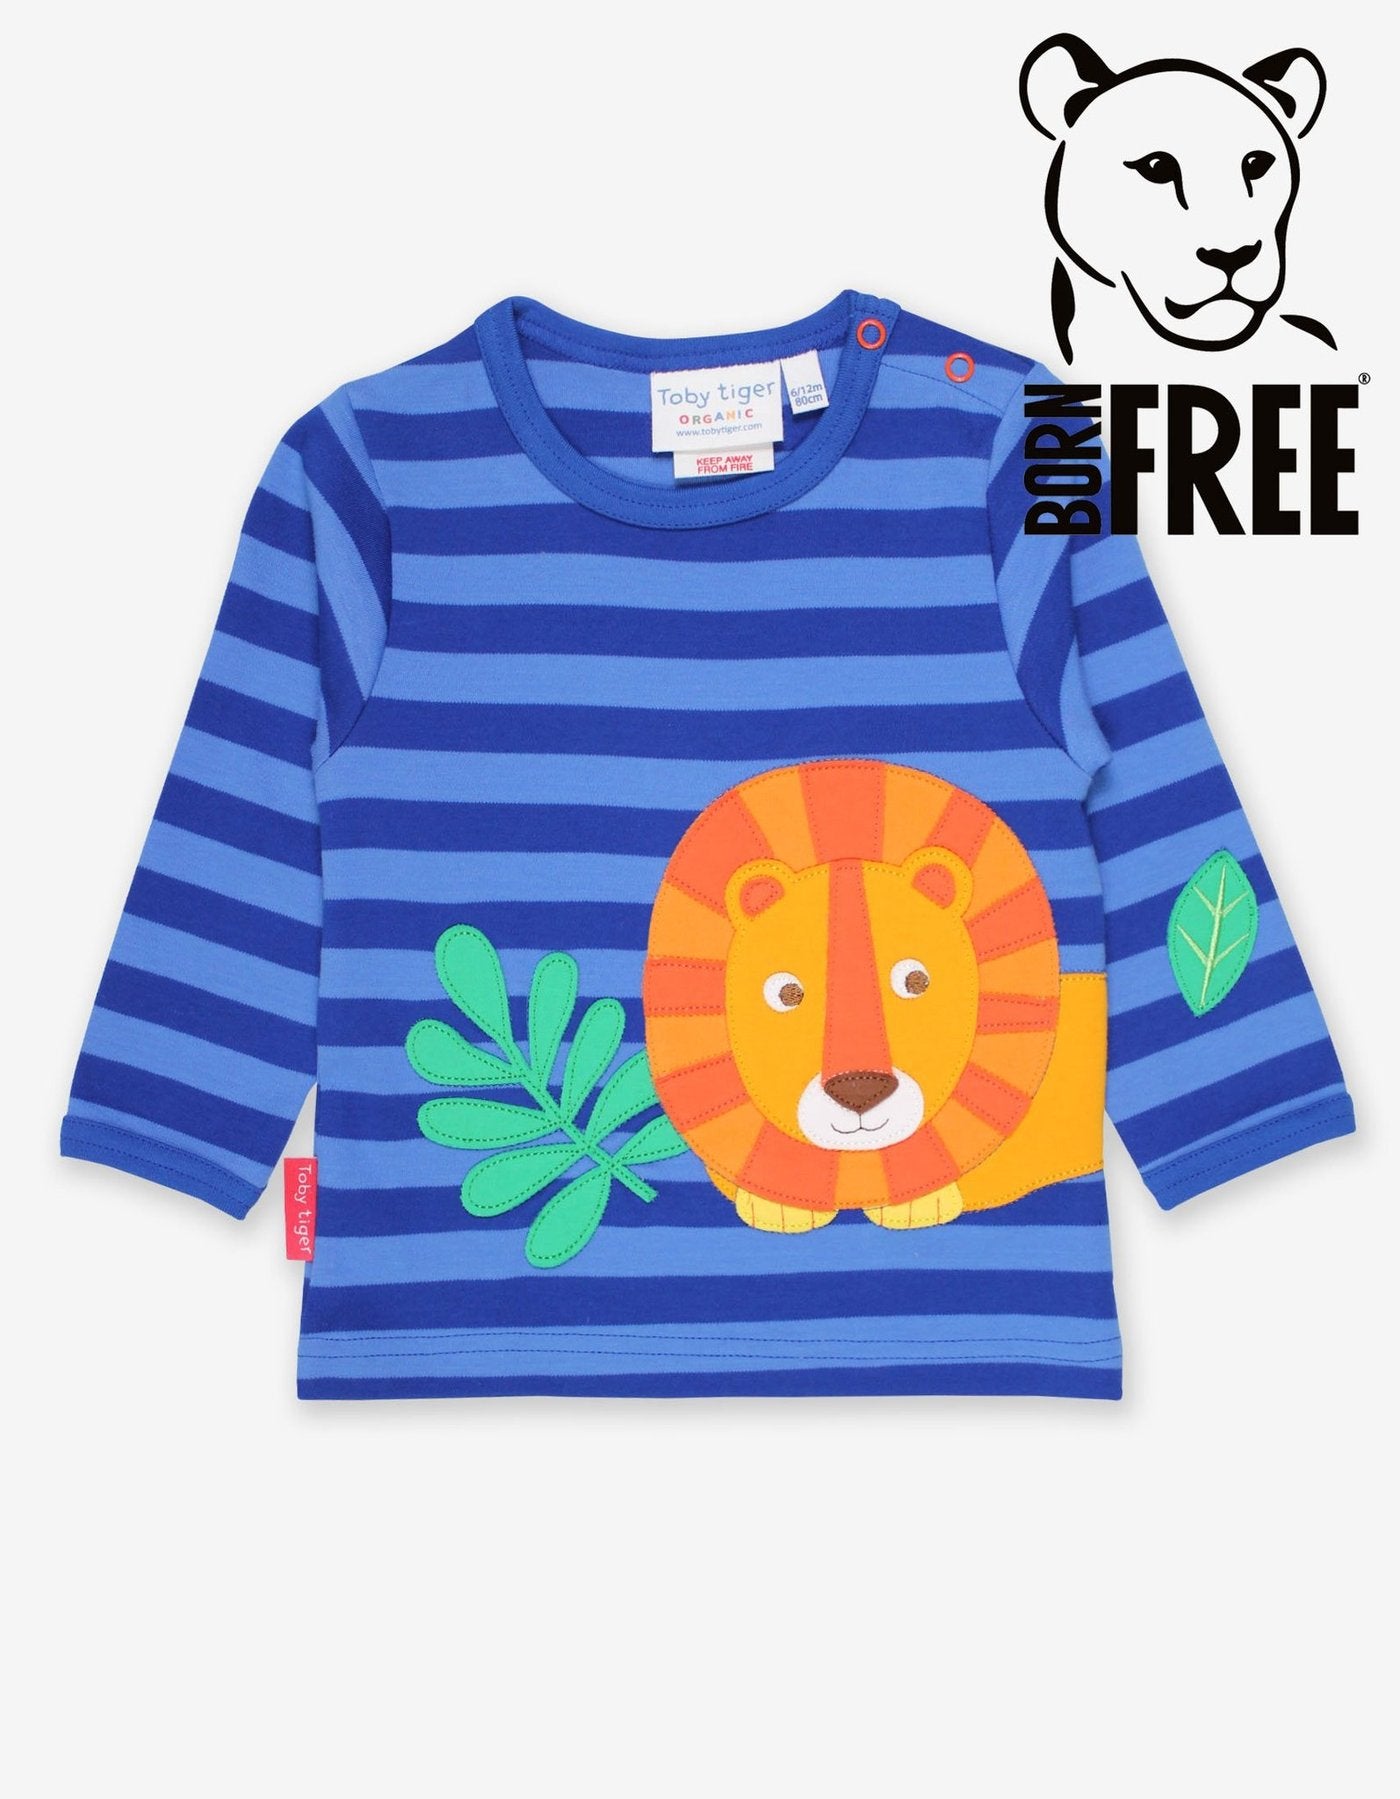 Toby Tiger Blue Striped Lion Born Free Charity T-shirt